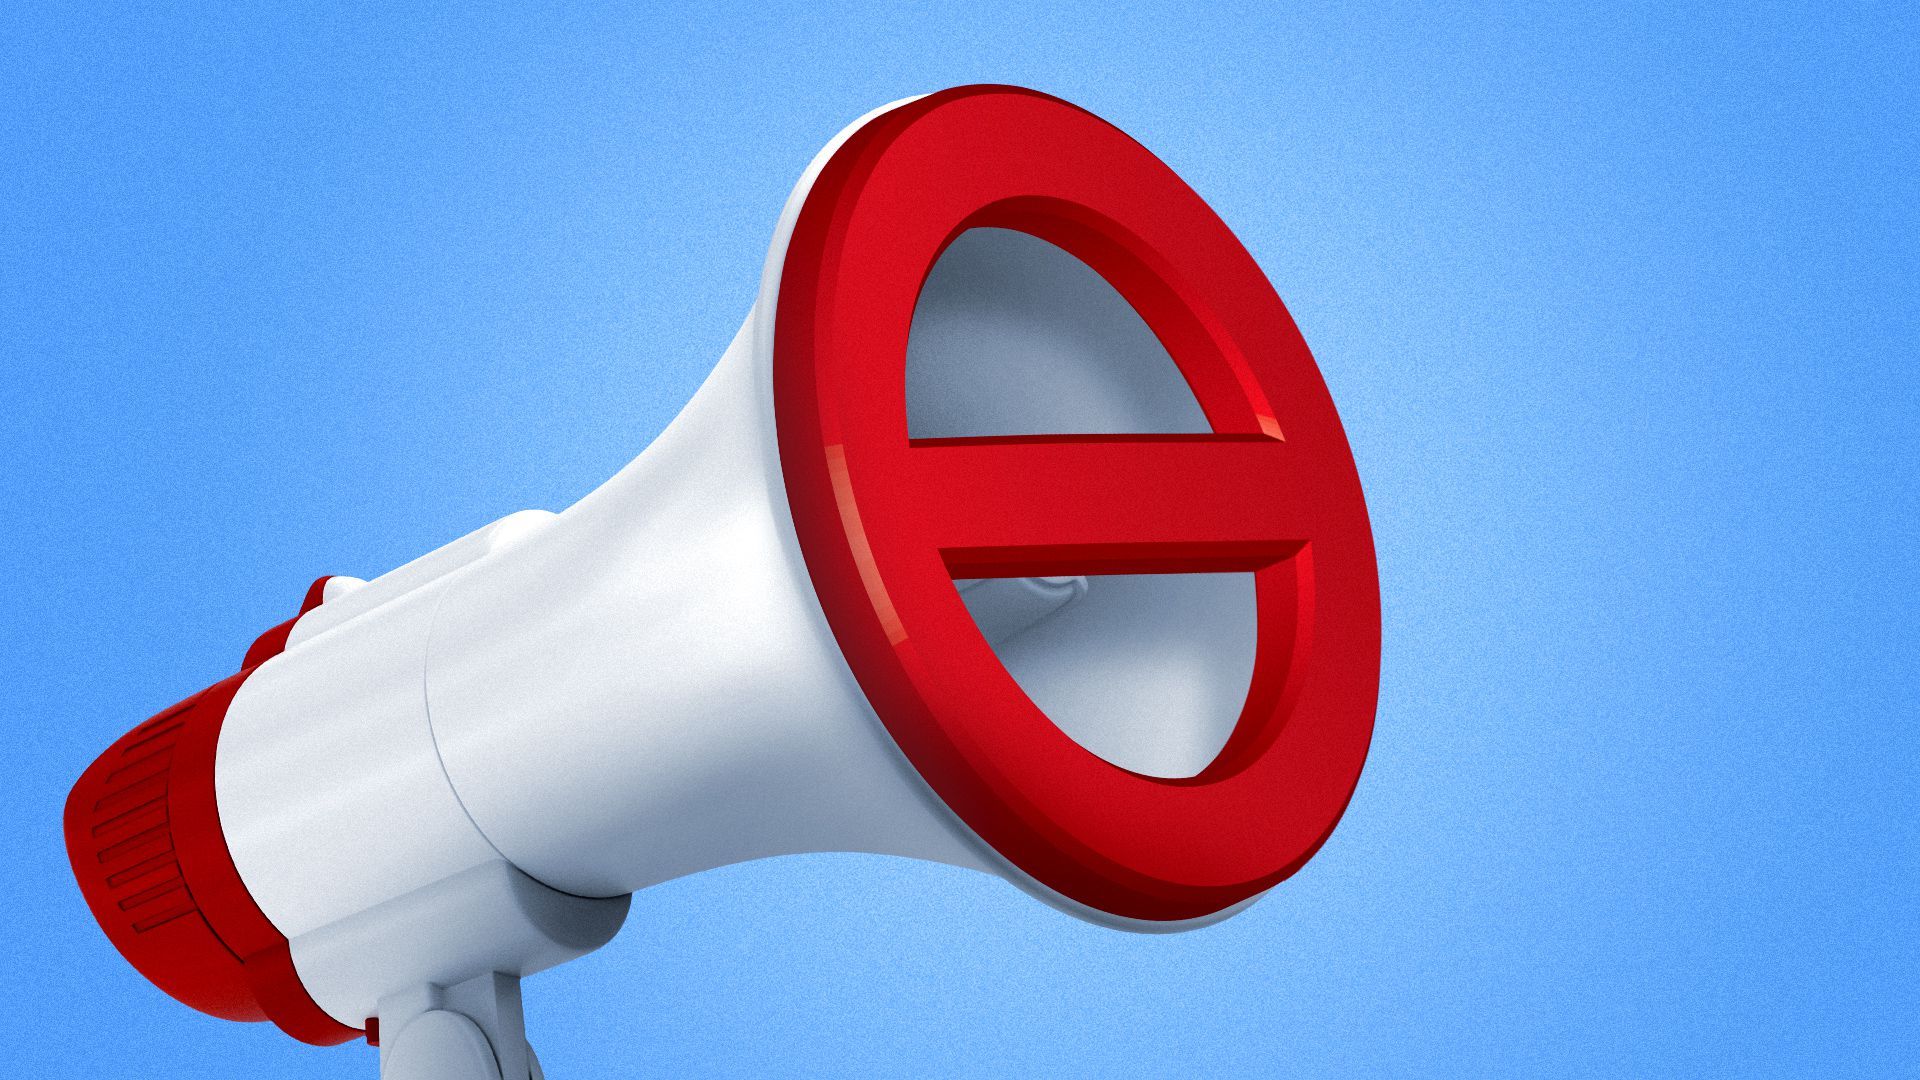 Illustration of a bullhorn with a "no" symbol across the front of the horn.